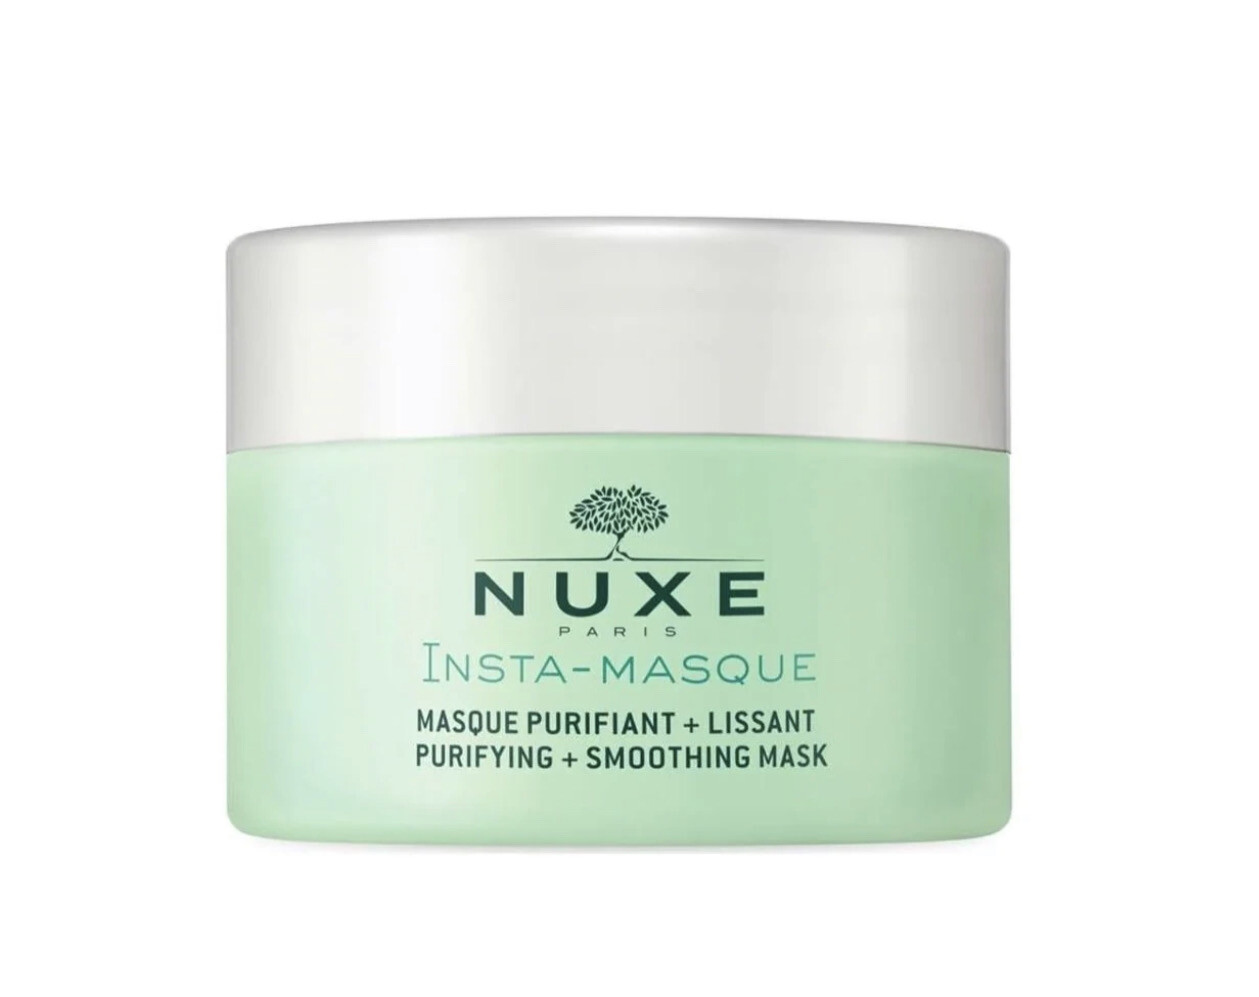 NUXE - Insta-Masque Purifying + Smoothing Mask - Rose and Clay for All Skin Types Even Sensitive